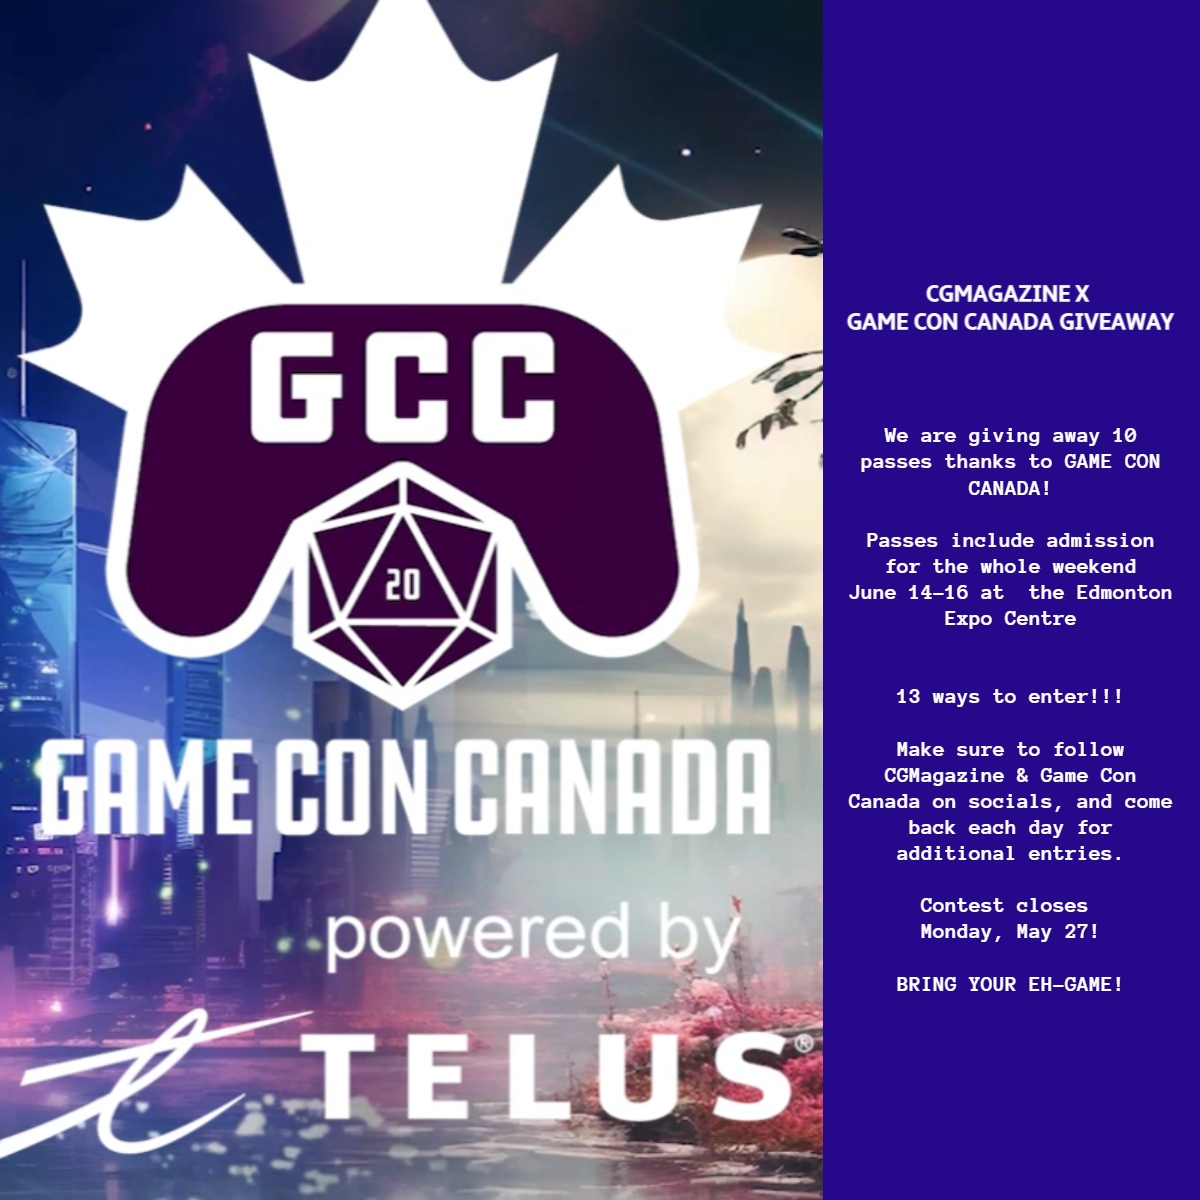 CGMagazine & @gameconcanada  are giving away 10 All Access Passes for June 14-16 at the Edmonton Expo Centre. Head to our contest on Gleam or our socials to enter!

gleam.io/GNRoj/cgmagazi…